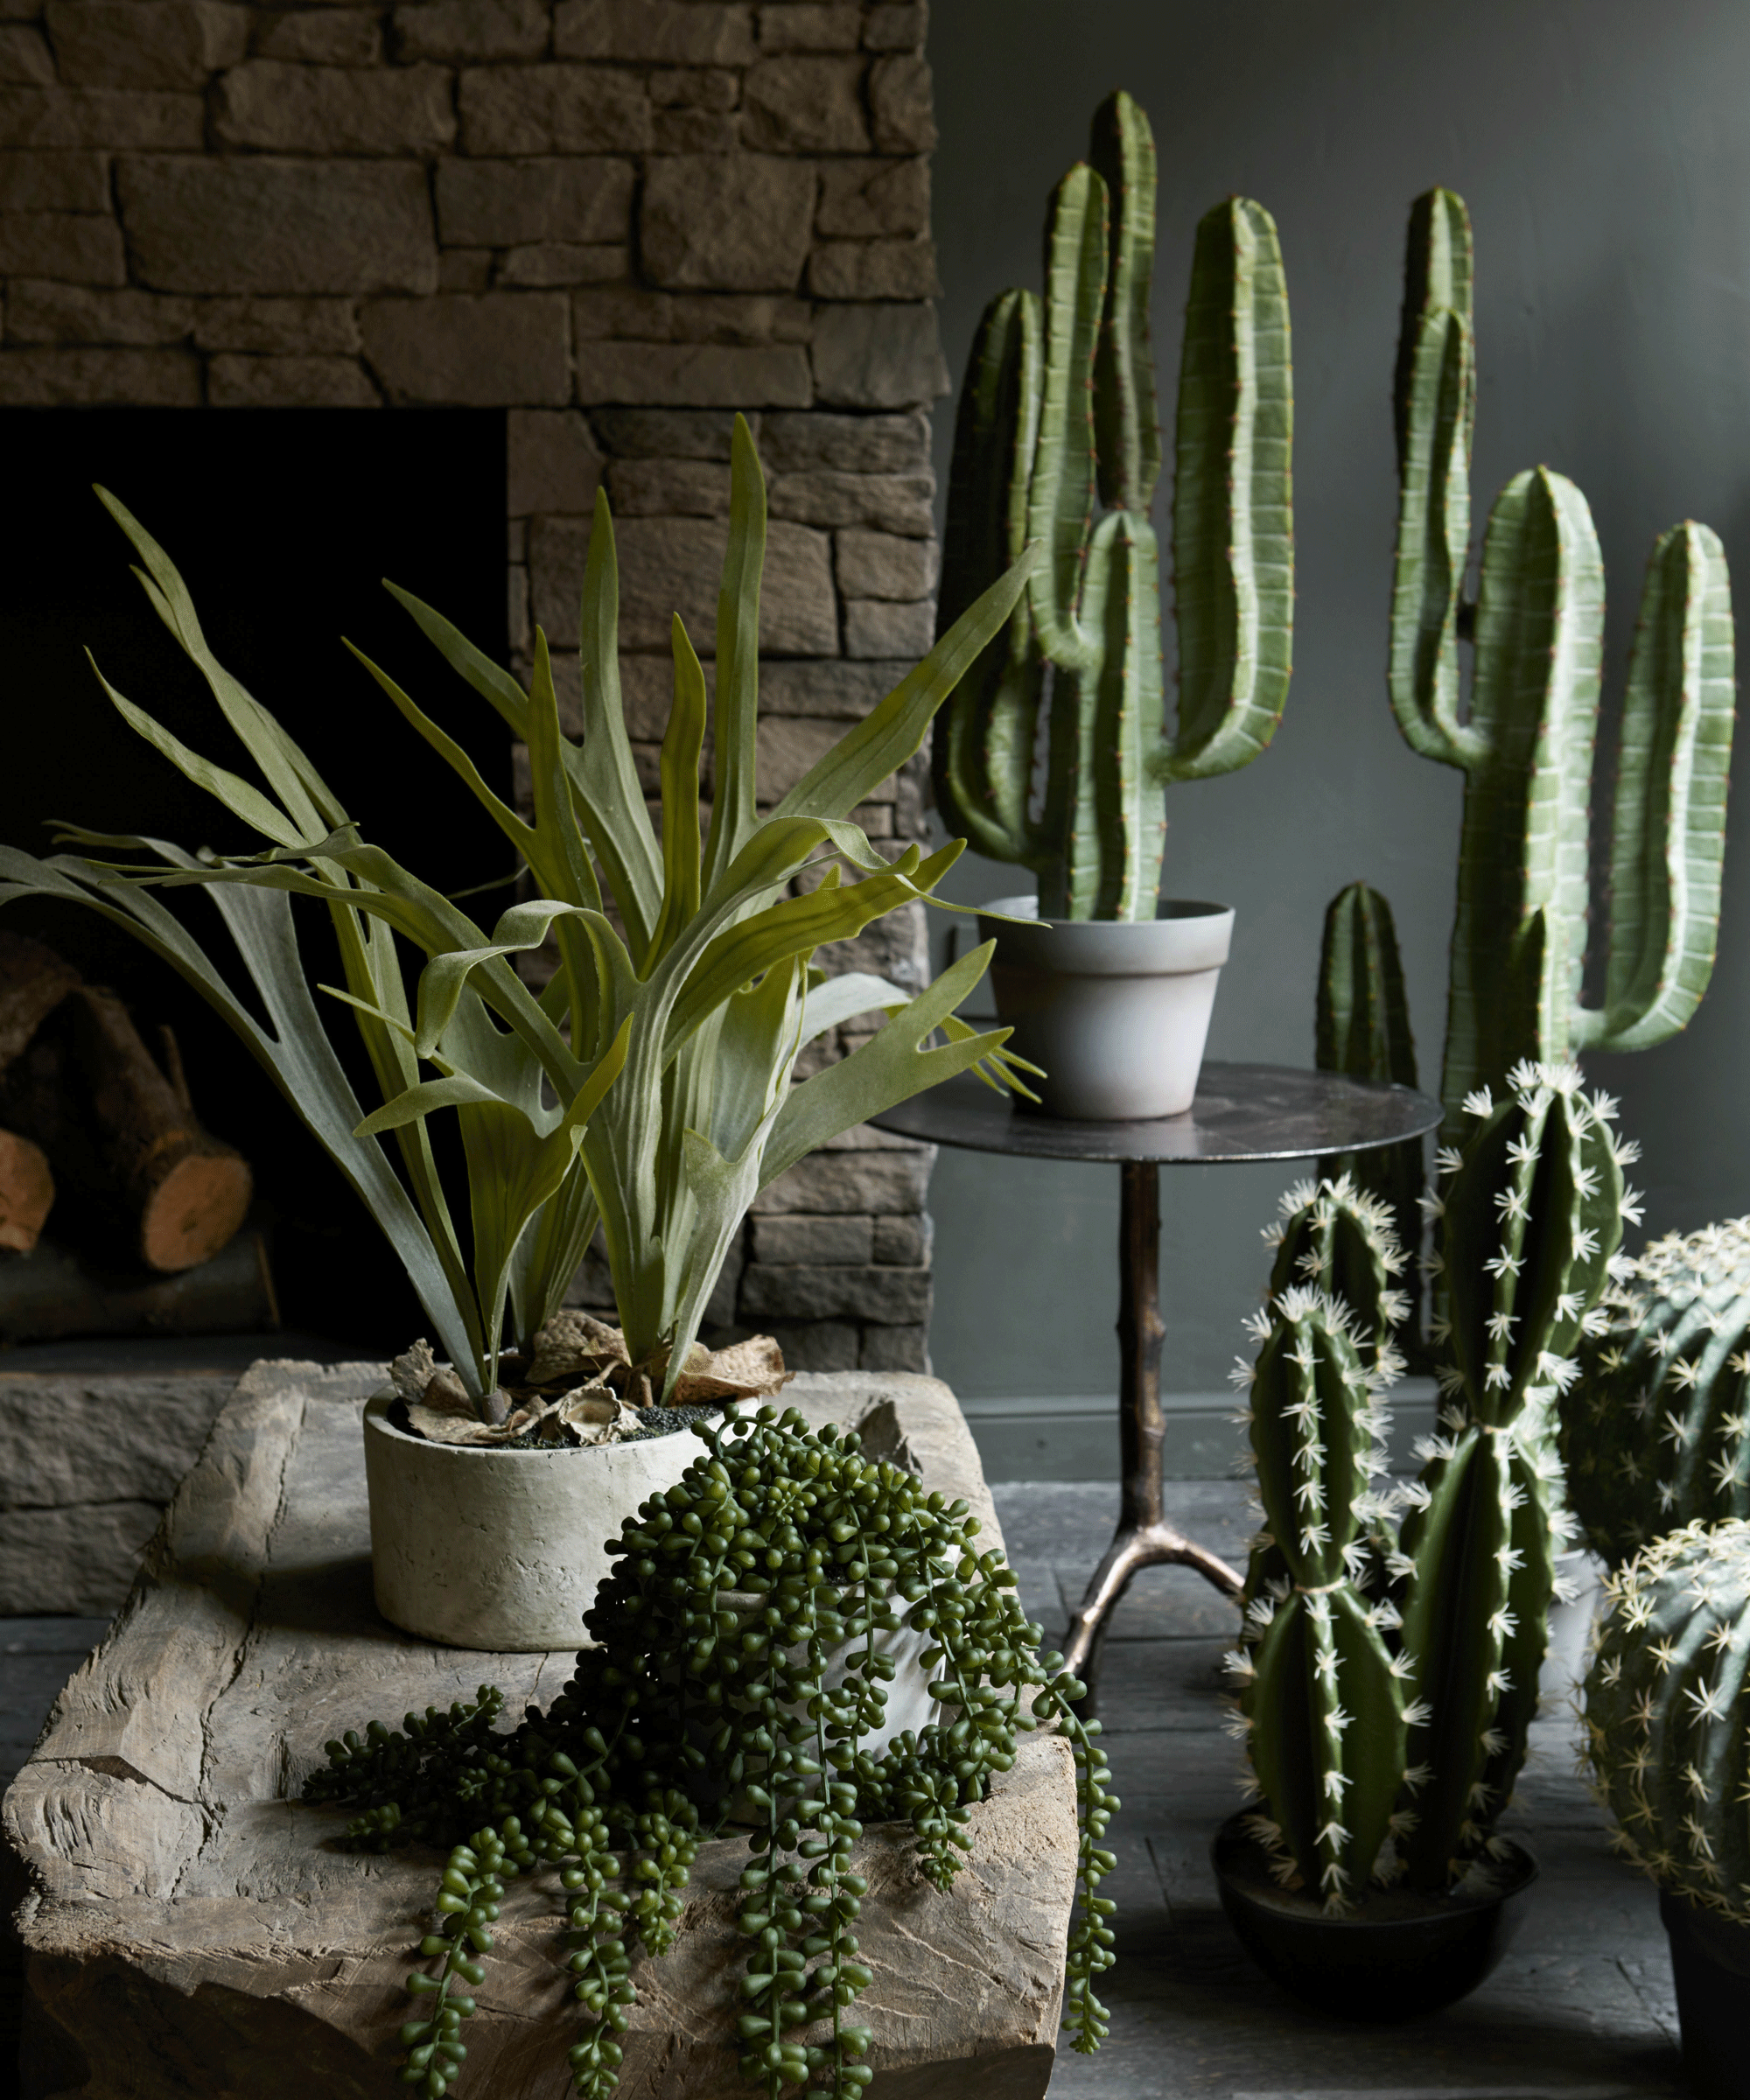 Cactus plants against a green wall